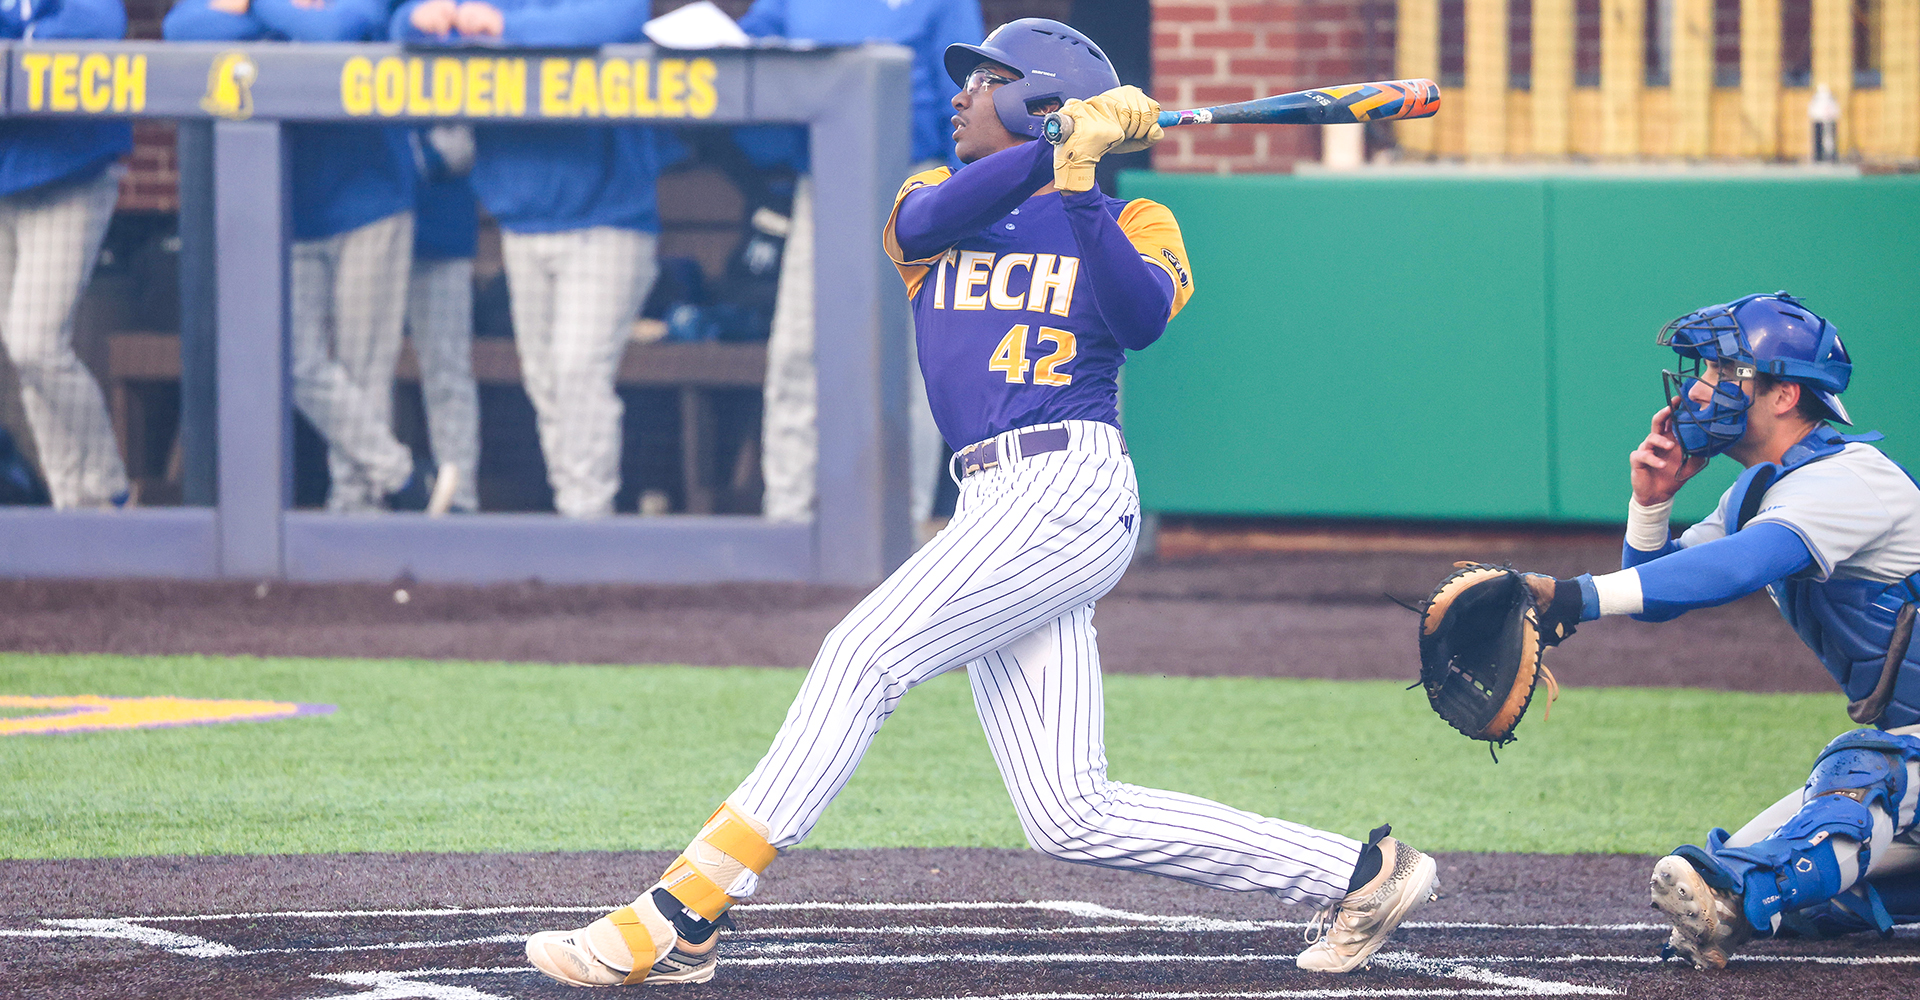 Home run ball leads Tech past SIUE in series opener